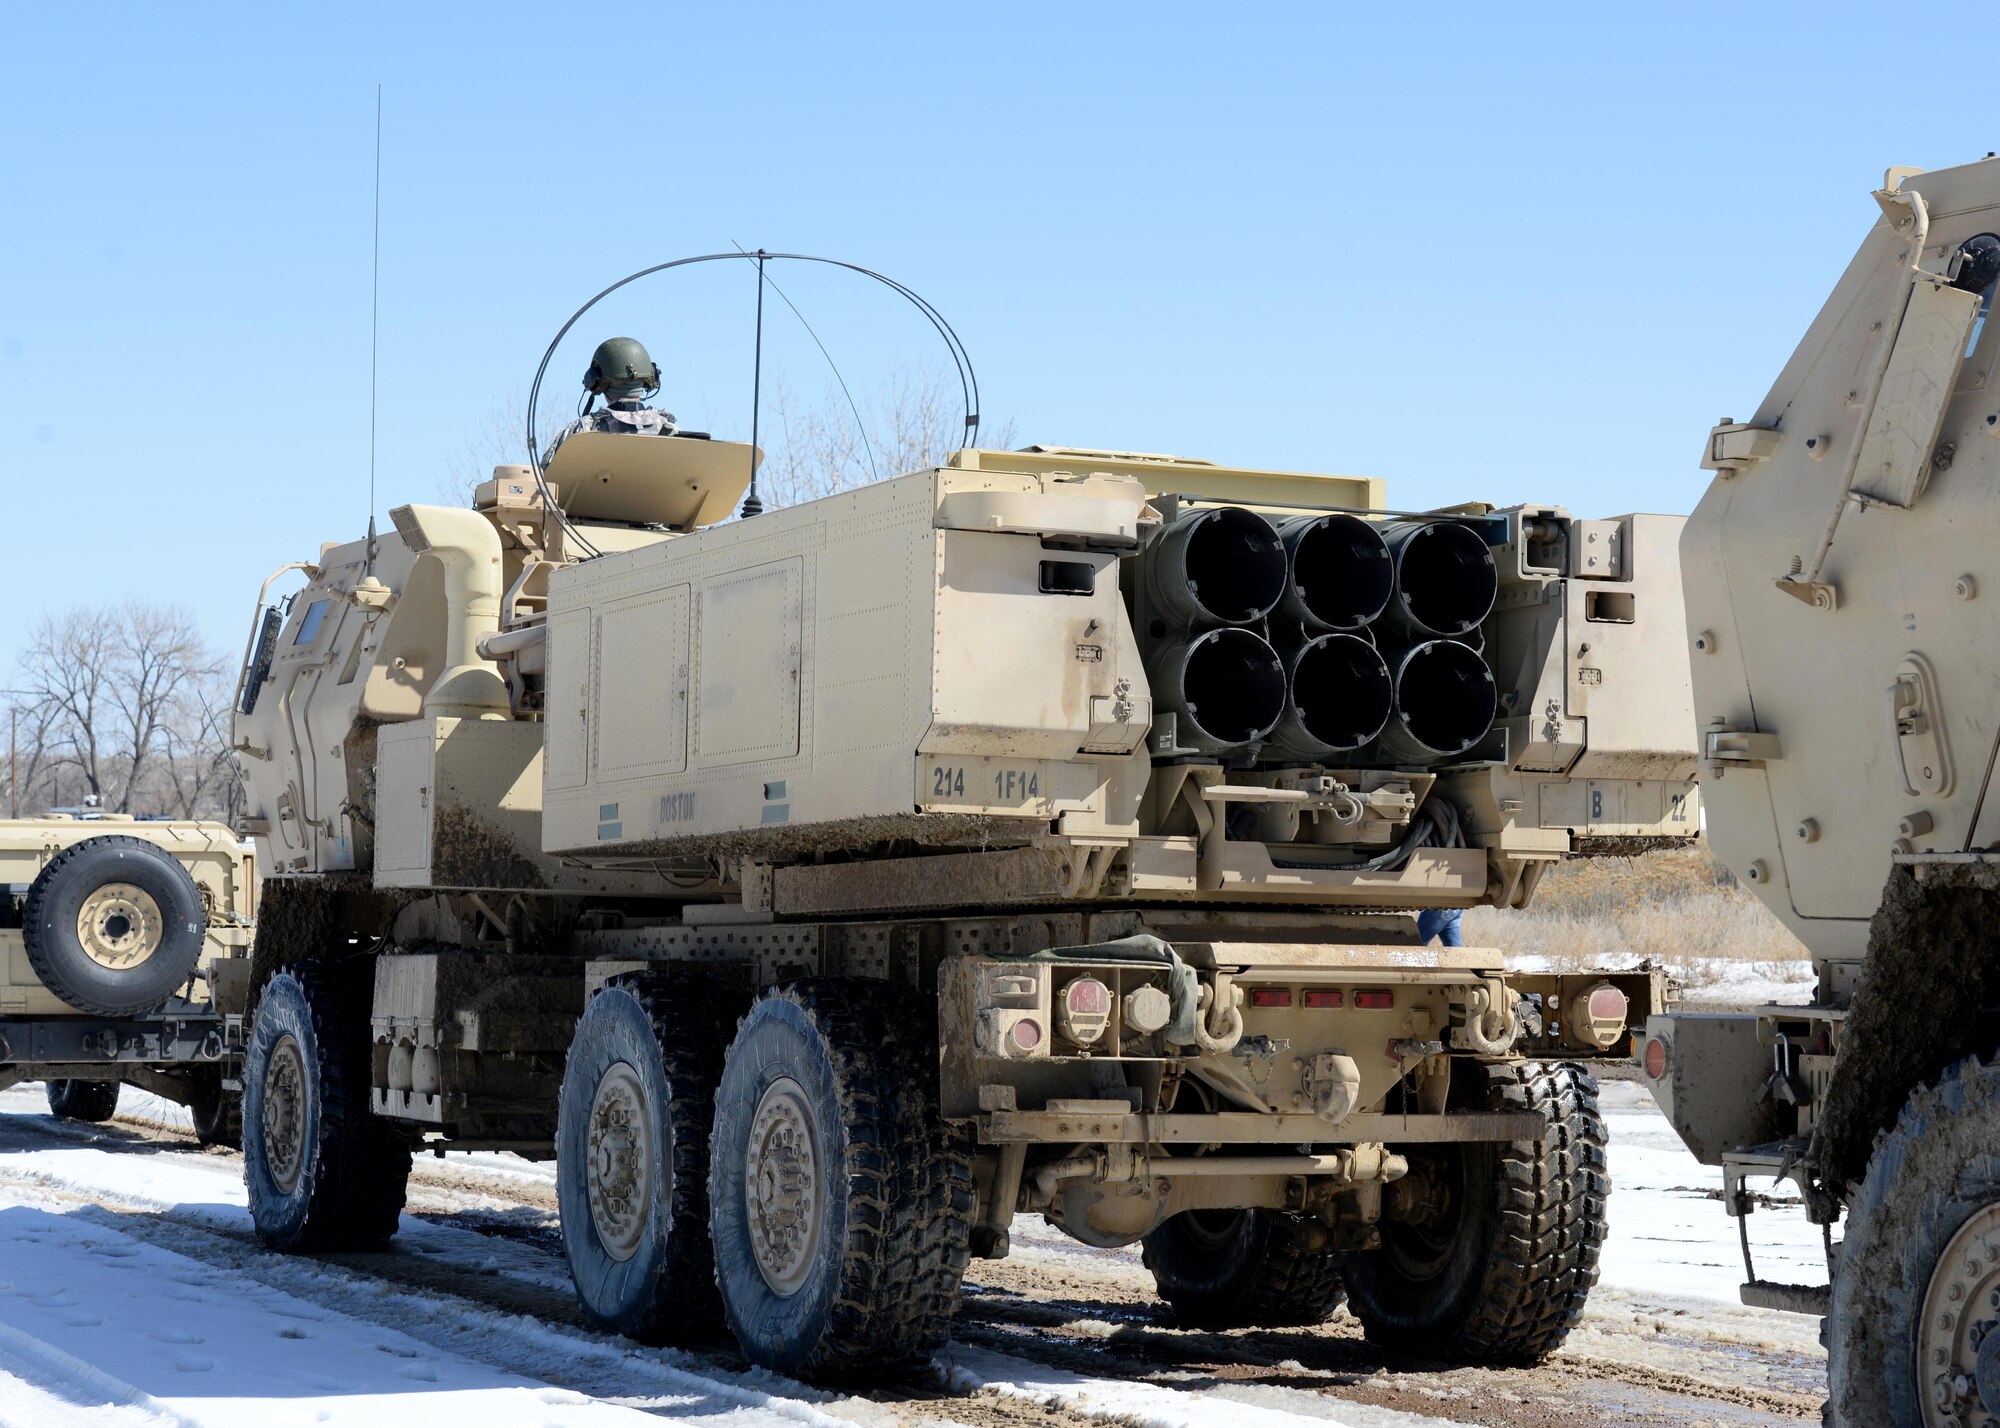 Soldiers form a line to transport their M142 High Mobility Artillery Rocket System vehicles after successfully firing 12 rockets, March 6, 2015, at Fort Carson, Colo. The training helped Airmen and Soldiers stay proficient in transporting, setting up and firing a HIMARS. The Soldiers were from the 1st Battalion, 14 Field Artillery Regiment, 214th Fires Brigade. (U.S. Air Force photo/Airman 1st Class Nathan Clark)